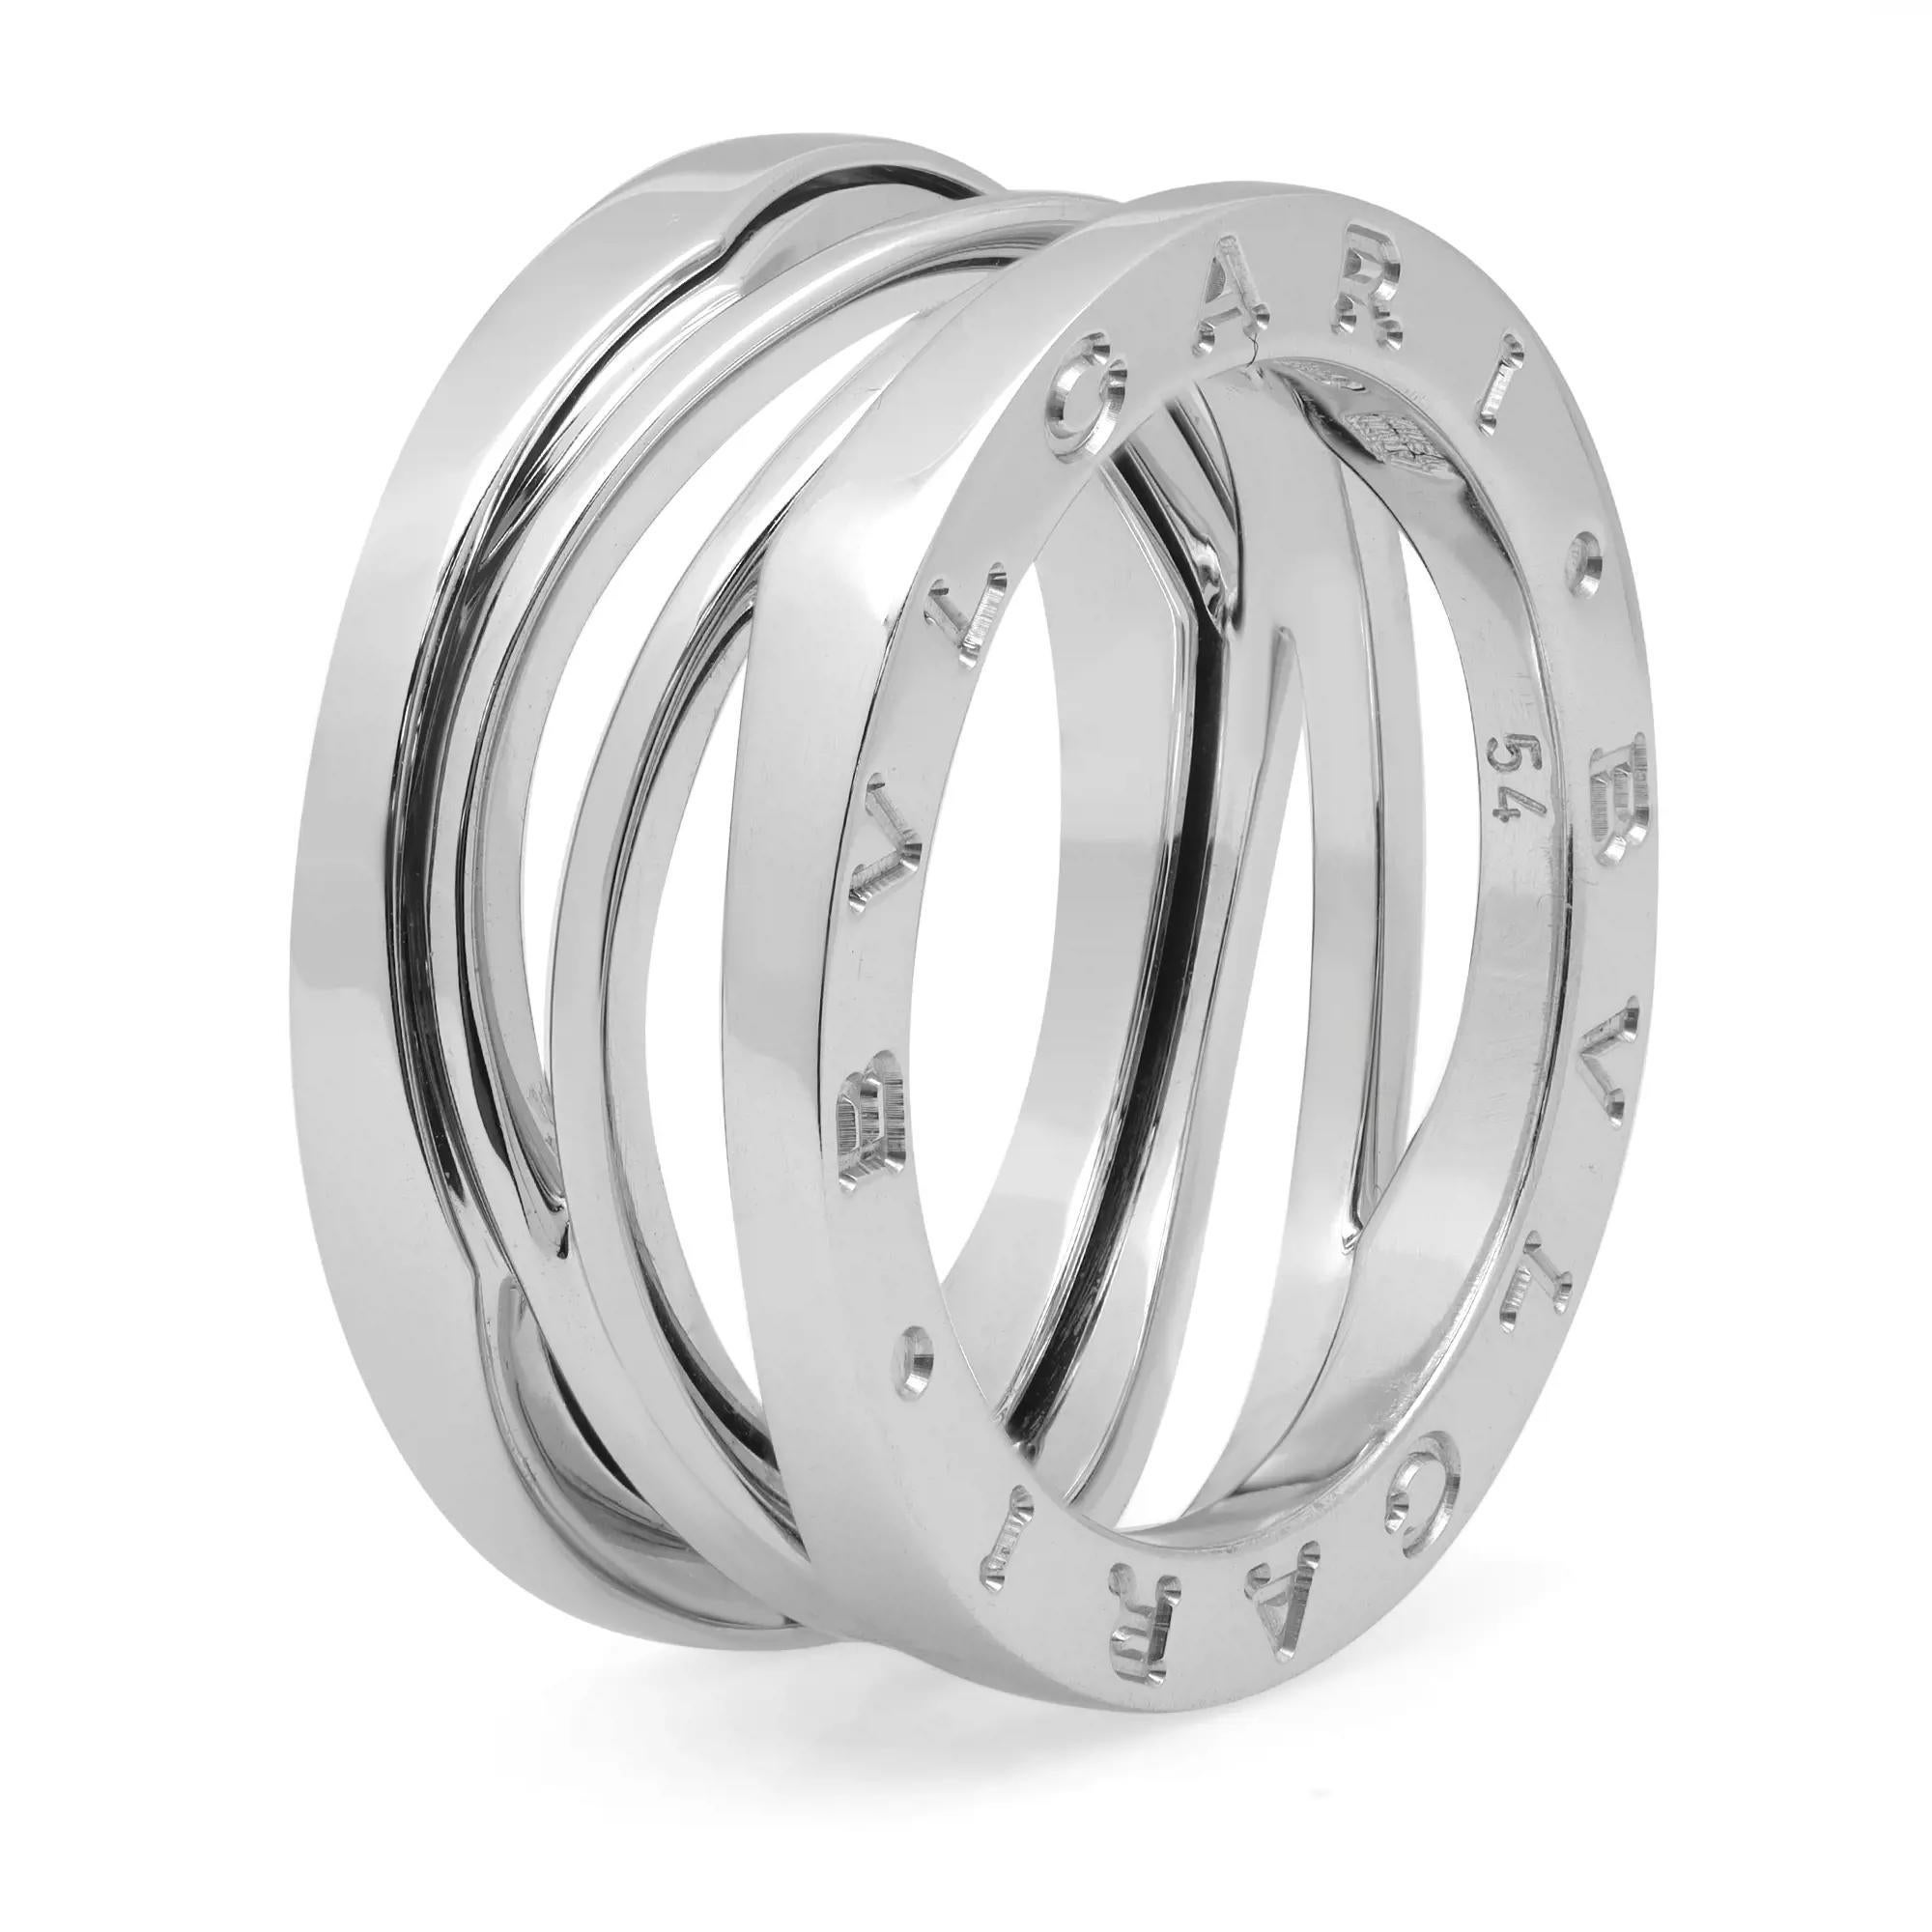 B.zero1 Design Legend jewelry is a perfect collision of modernity and tradition. Crafted in fine 18K White Gold. It features a clean modern three band ring engraved with the BVLGARI logo on both sides. This ring makes a great timeless and modern